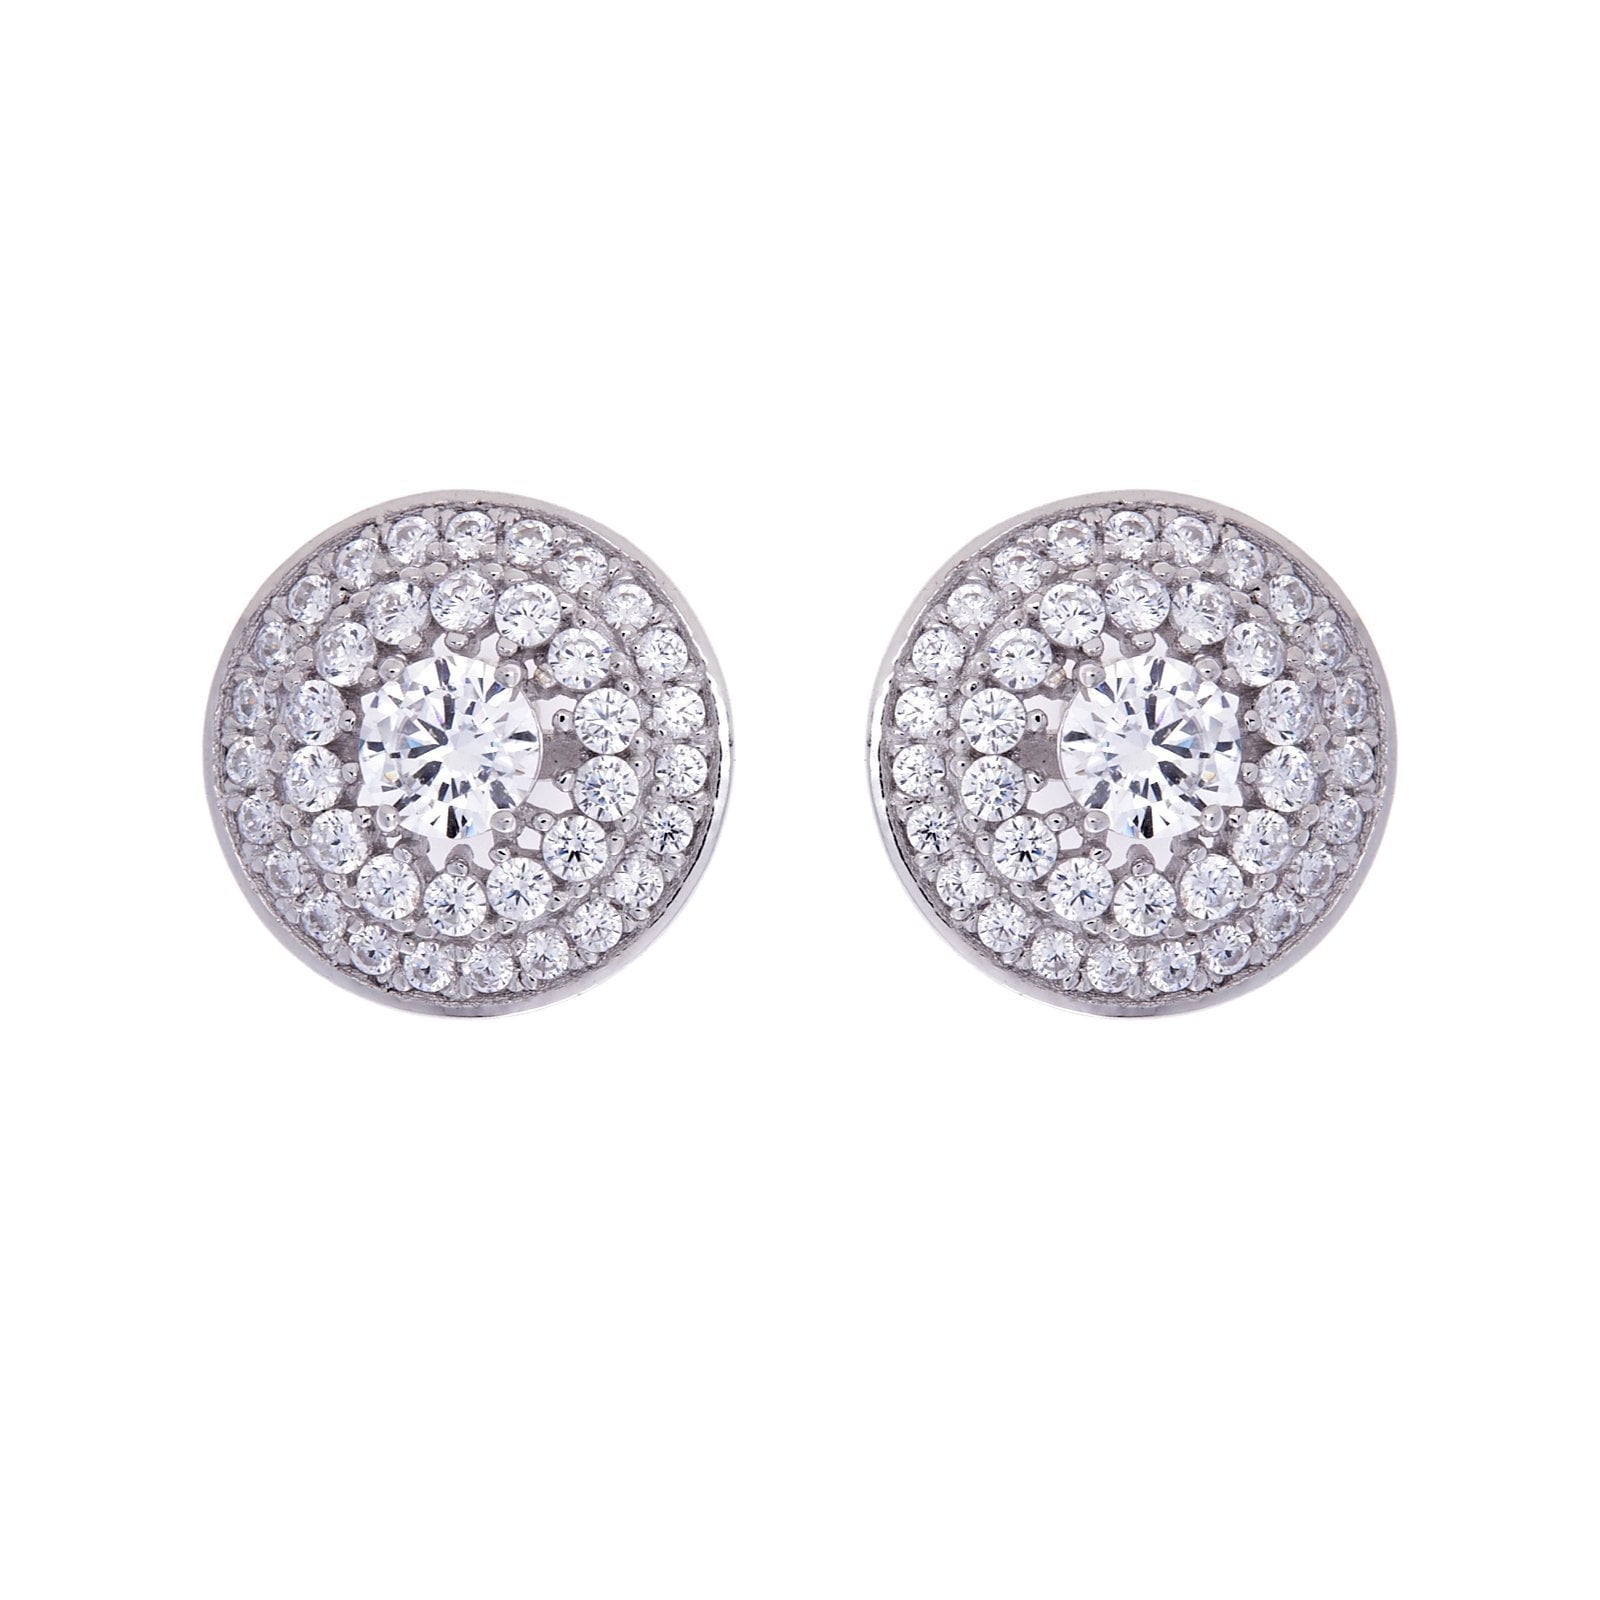 Sybella Earrings Silver Sybella Round Studs